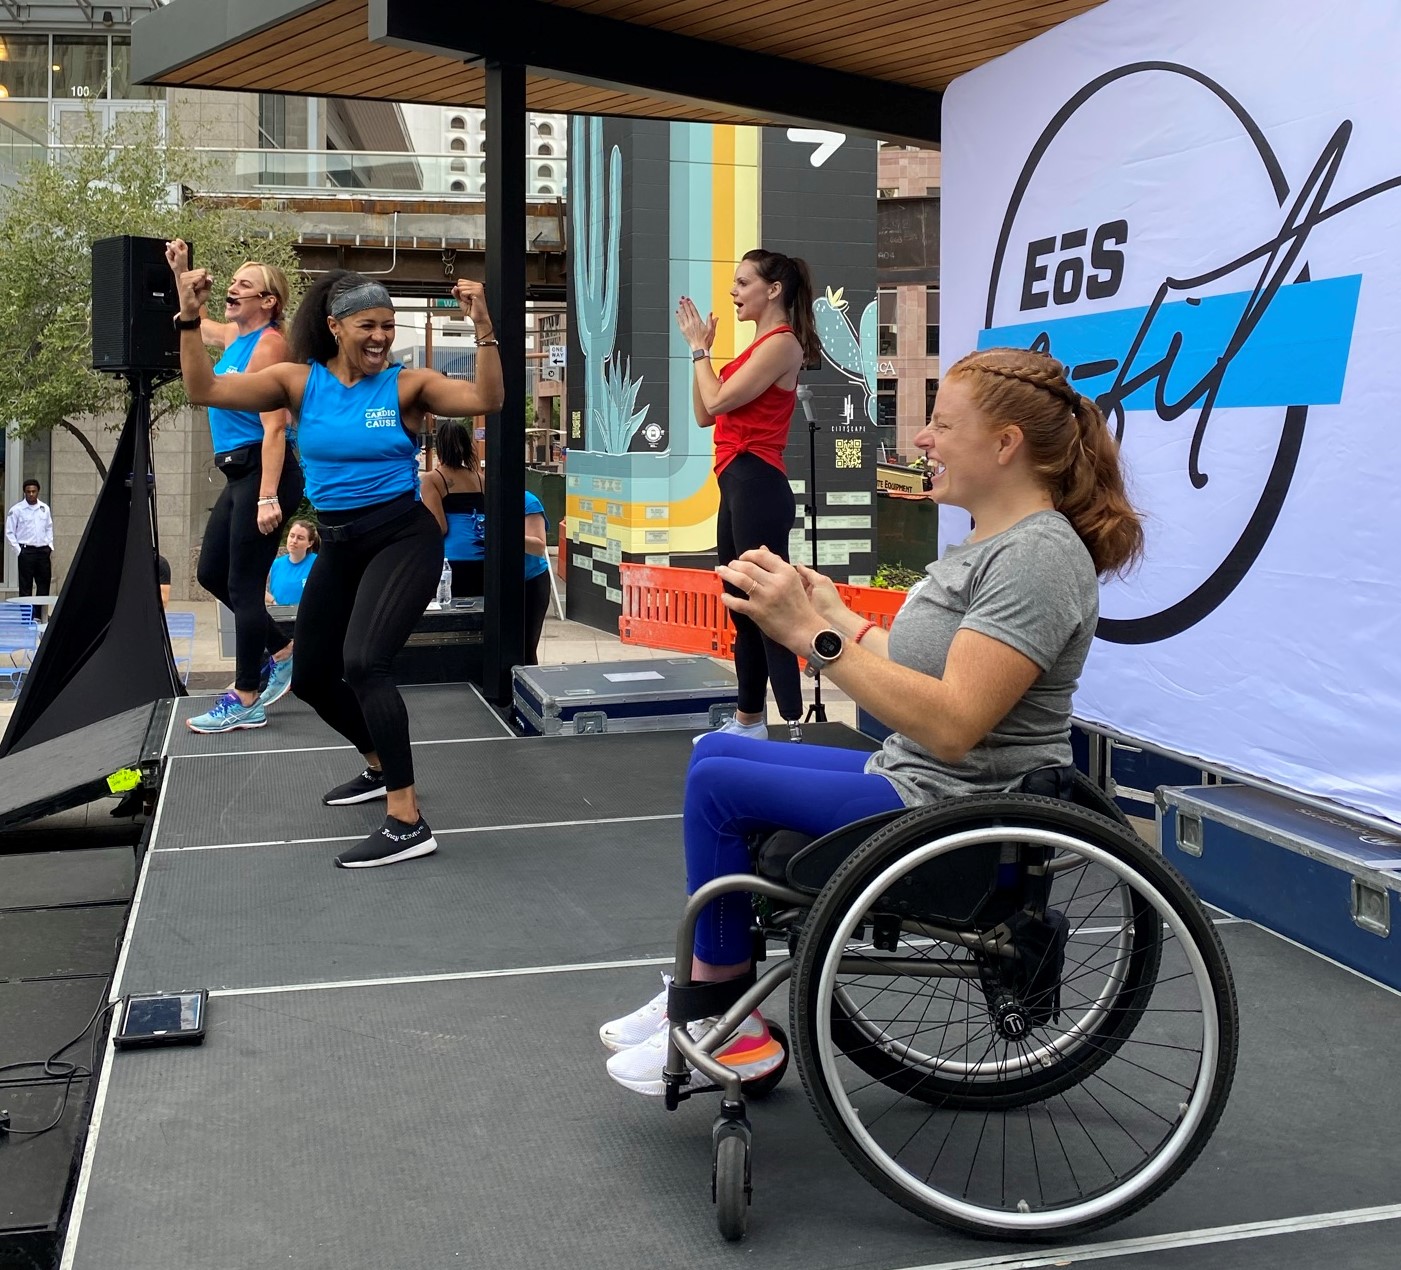 Challenged Athletes Foundation and EōS Fitness Provide Fitness Opportunities for All